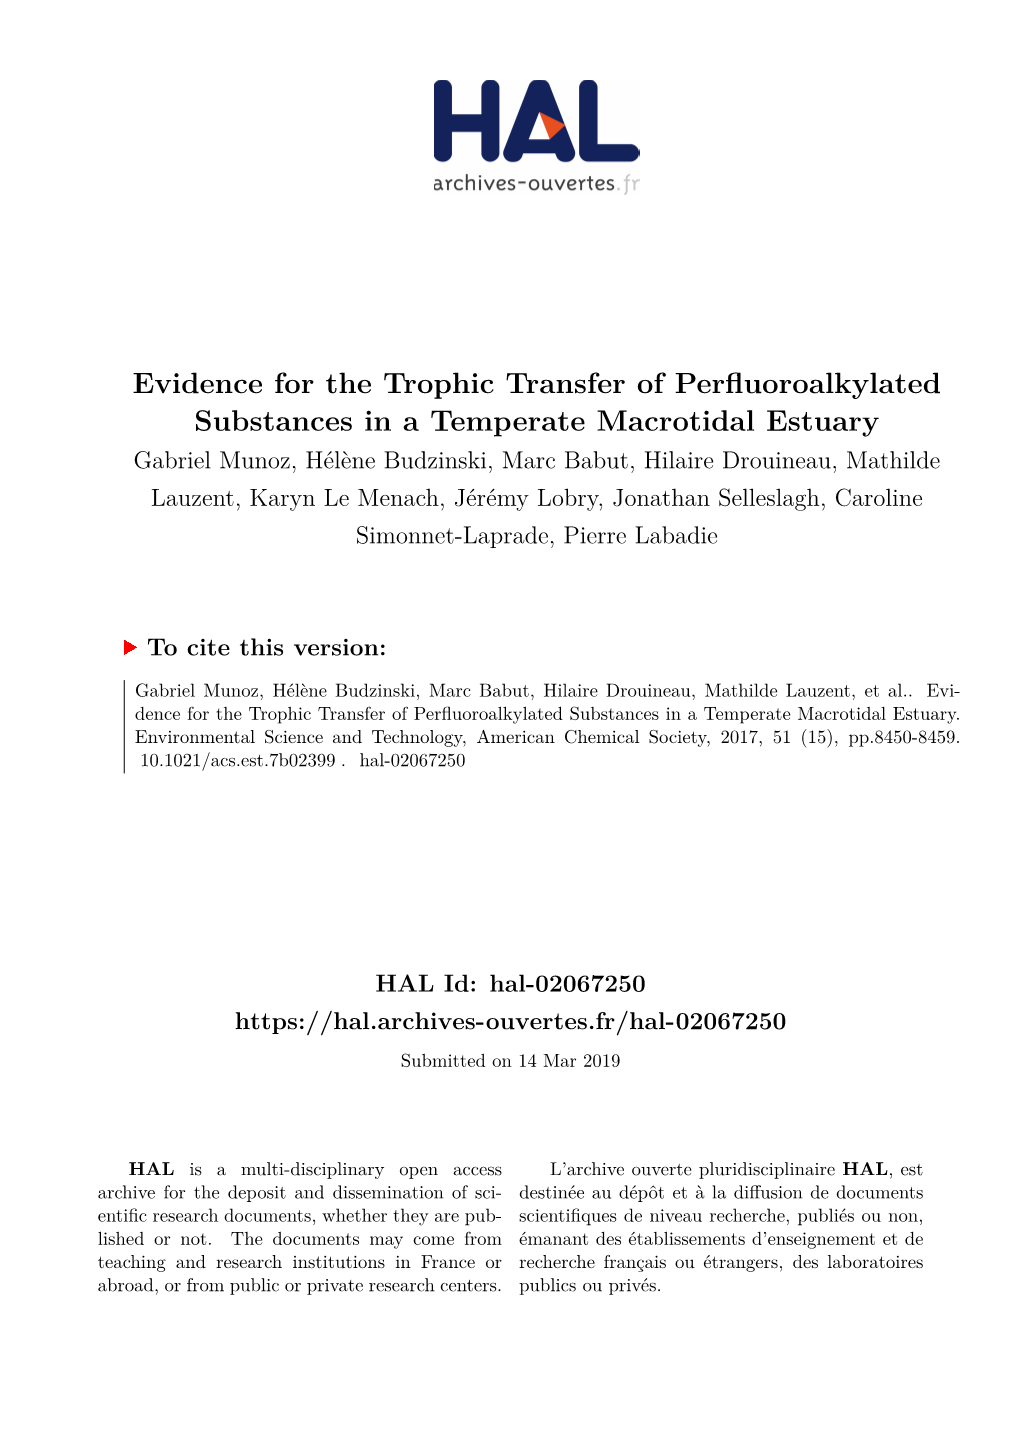 Evidence for the Trophic Transfer of Perfluoroalkylated Substances in A